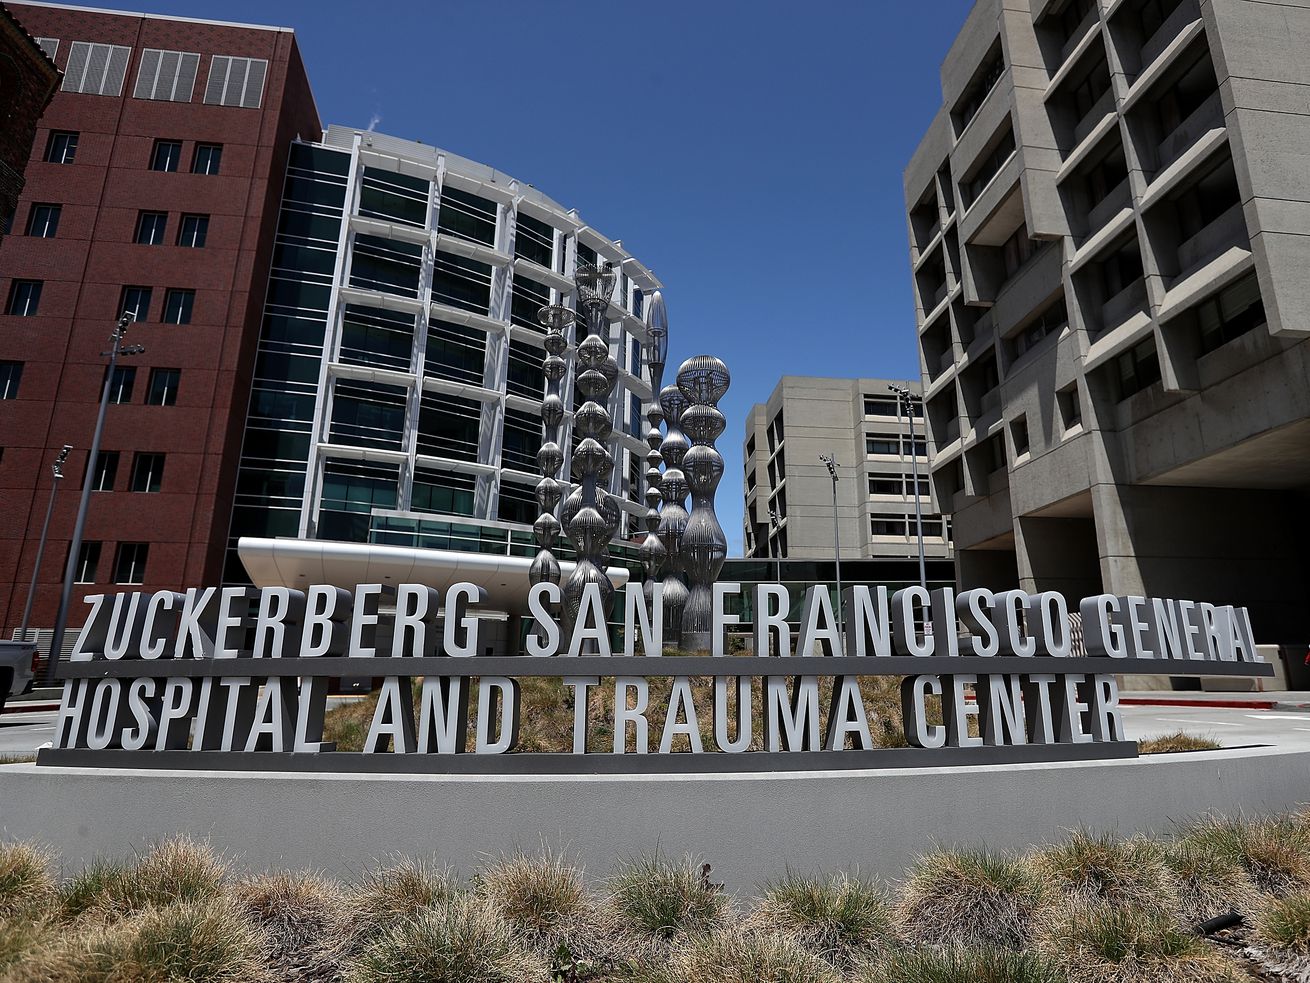 The sign outside the buildings reads “Zuckerberg San Francisco General Hospital and Trauma Center.”